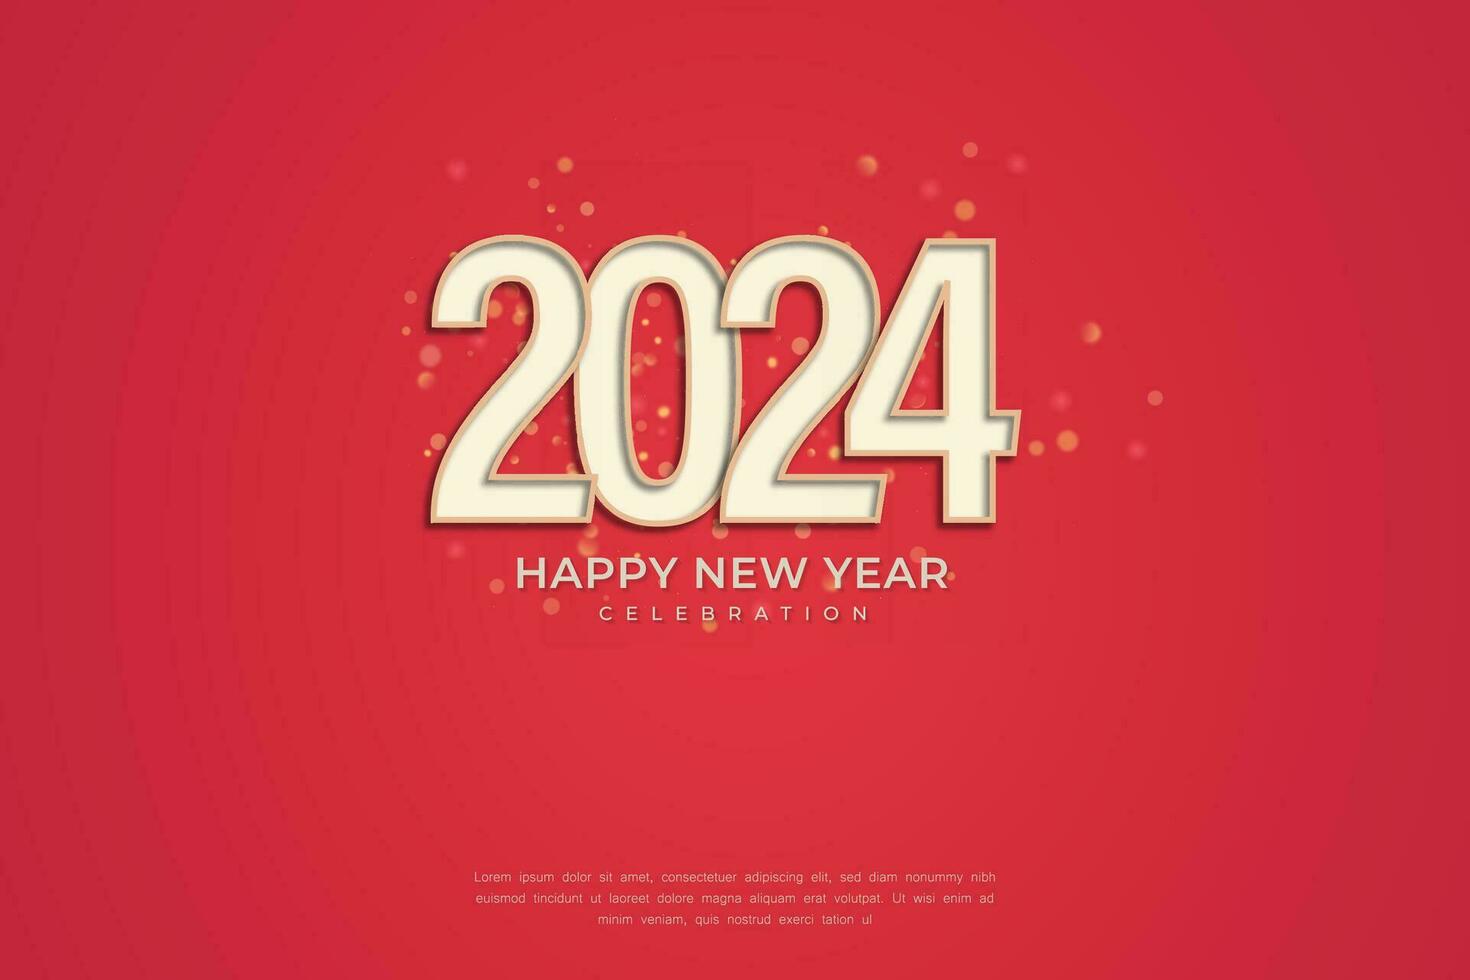 Simple and Clean Design Happy New Year 2024. Red Background for Background for Banners, Posters or Calendar. vector